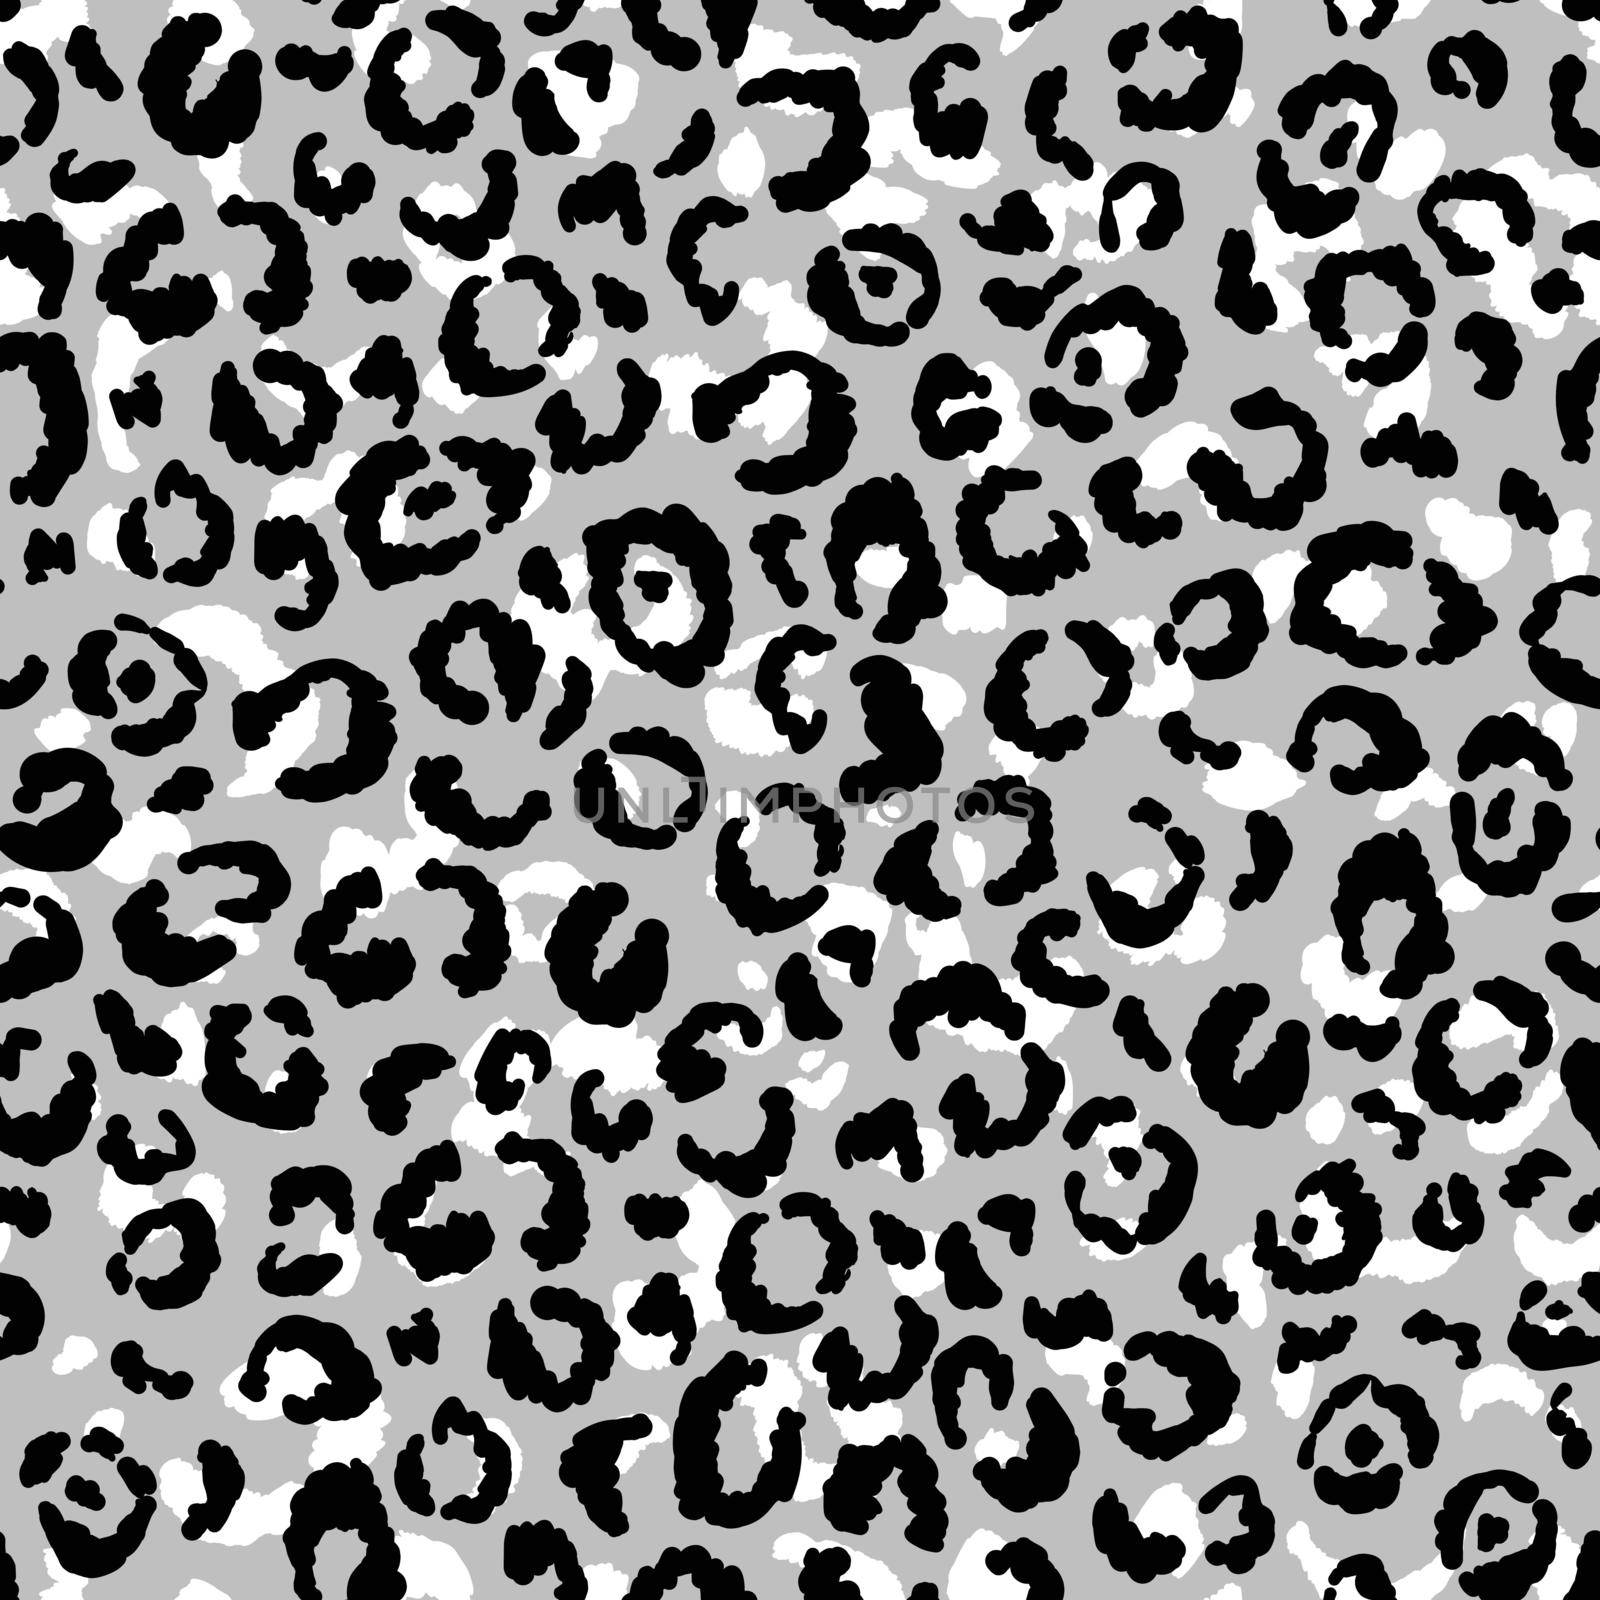 Abstract modern leopard seamless pattern. Animals trendy background. Grey and black decorative vector stock illustration for print, card, postcard, fabric, textile. Modern ornament of stylized skin by allaku